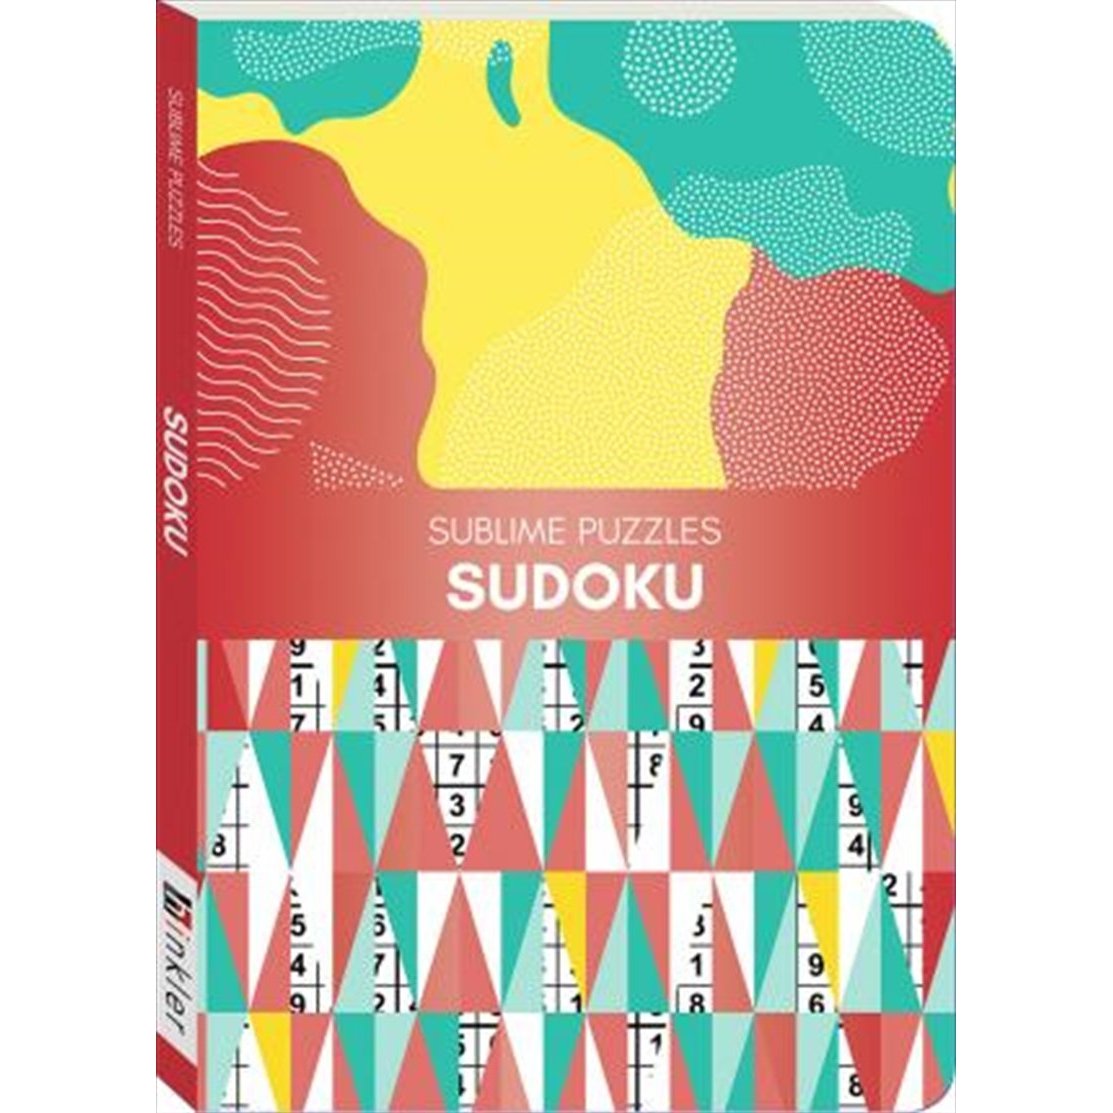 Sublime Puzzles Sudoko Book-Yarrawonga Fun and Games